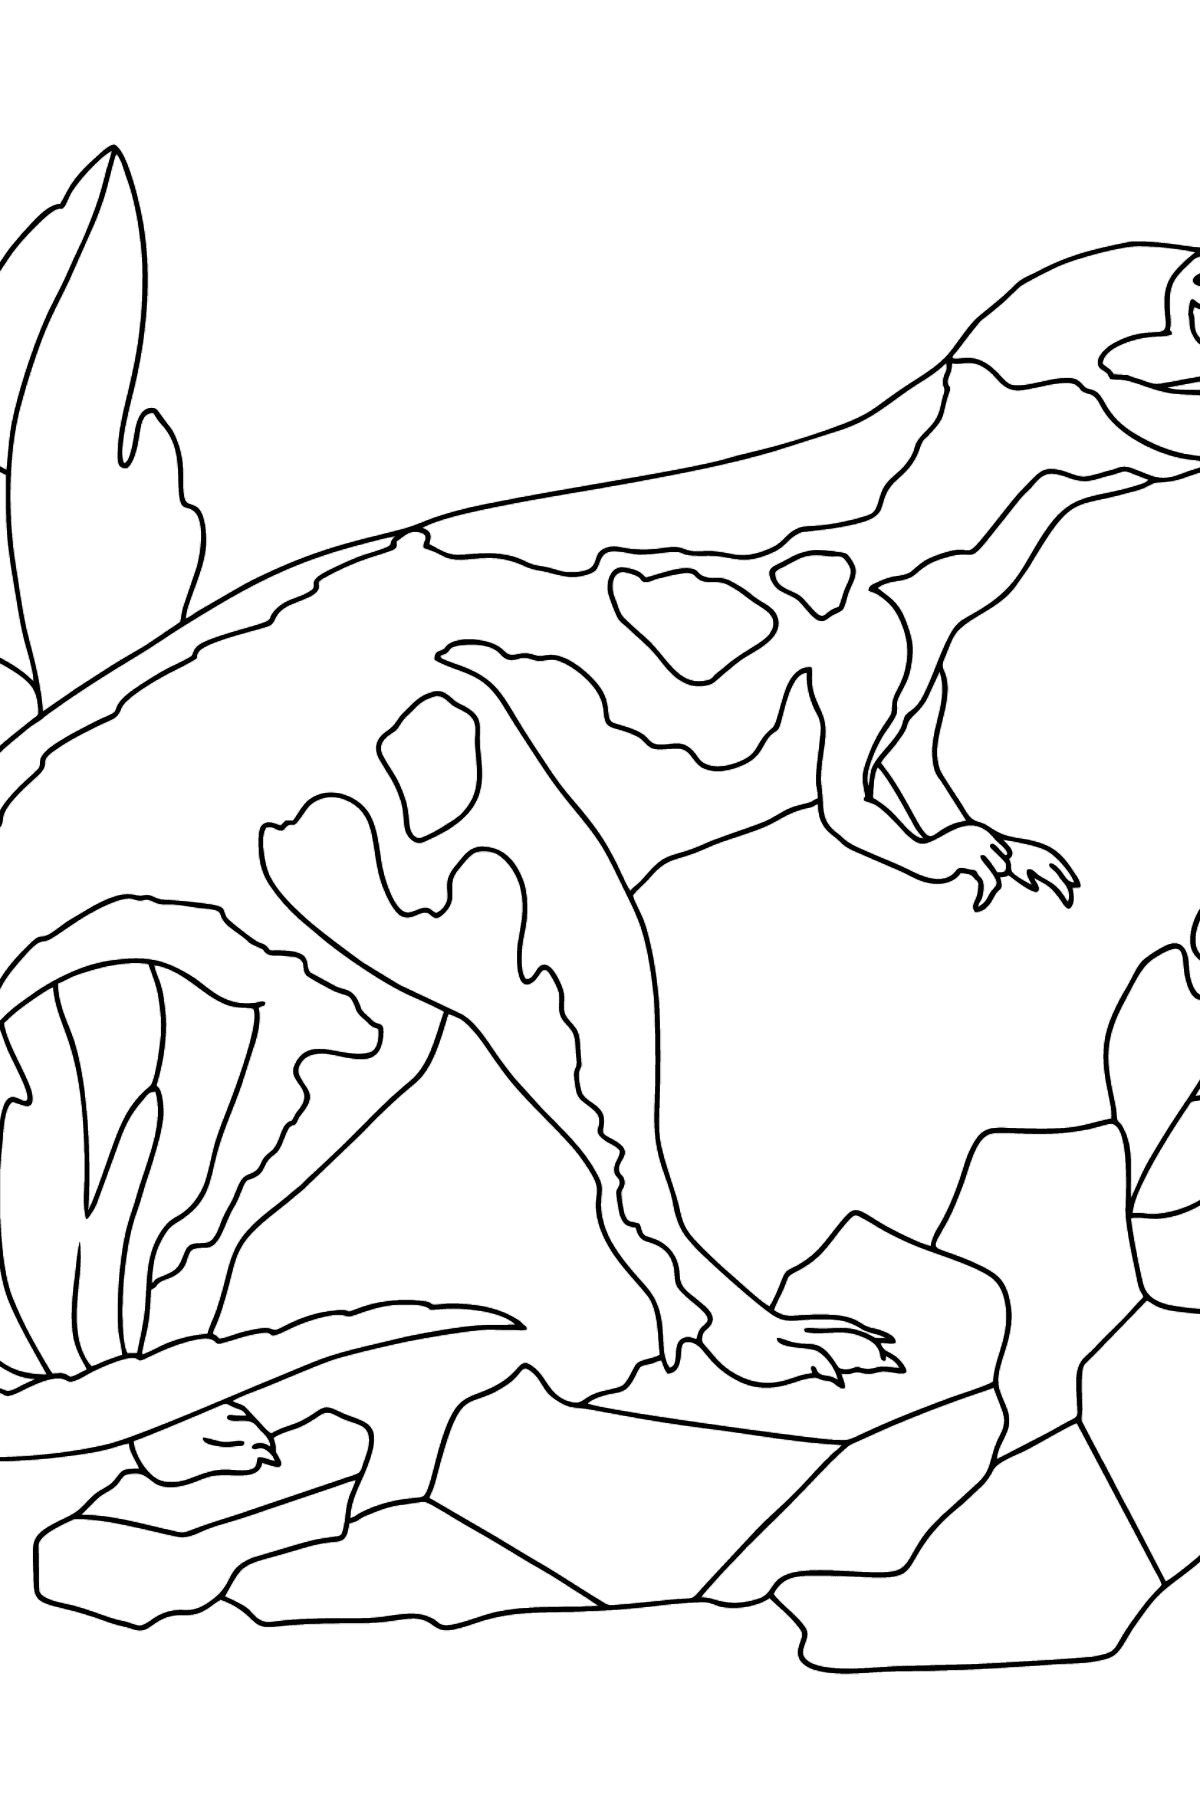 Tyrannosaurus Coloring Page (difficult) - Coloring Pages for Kids